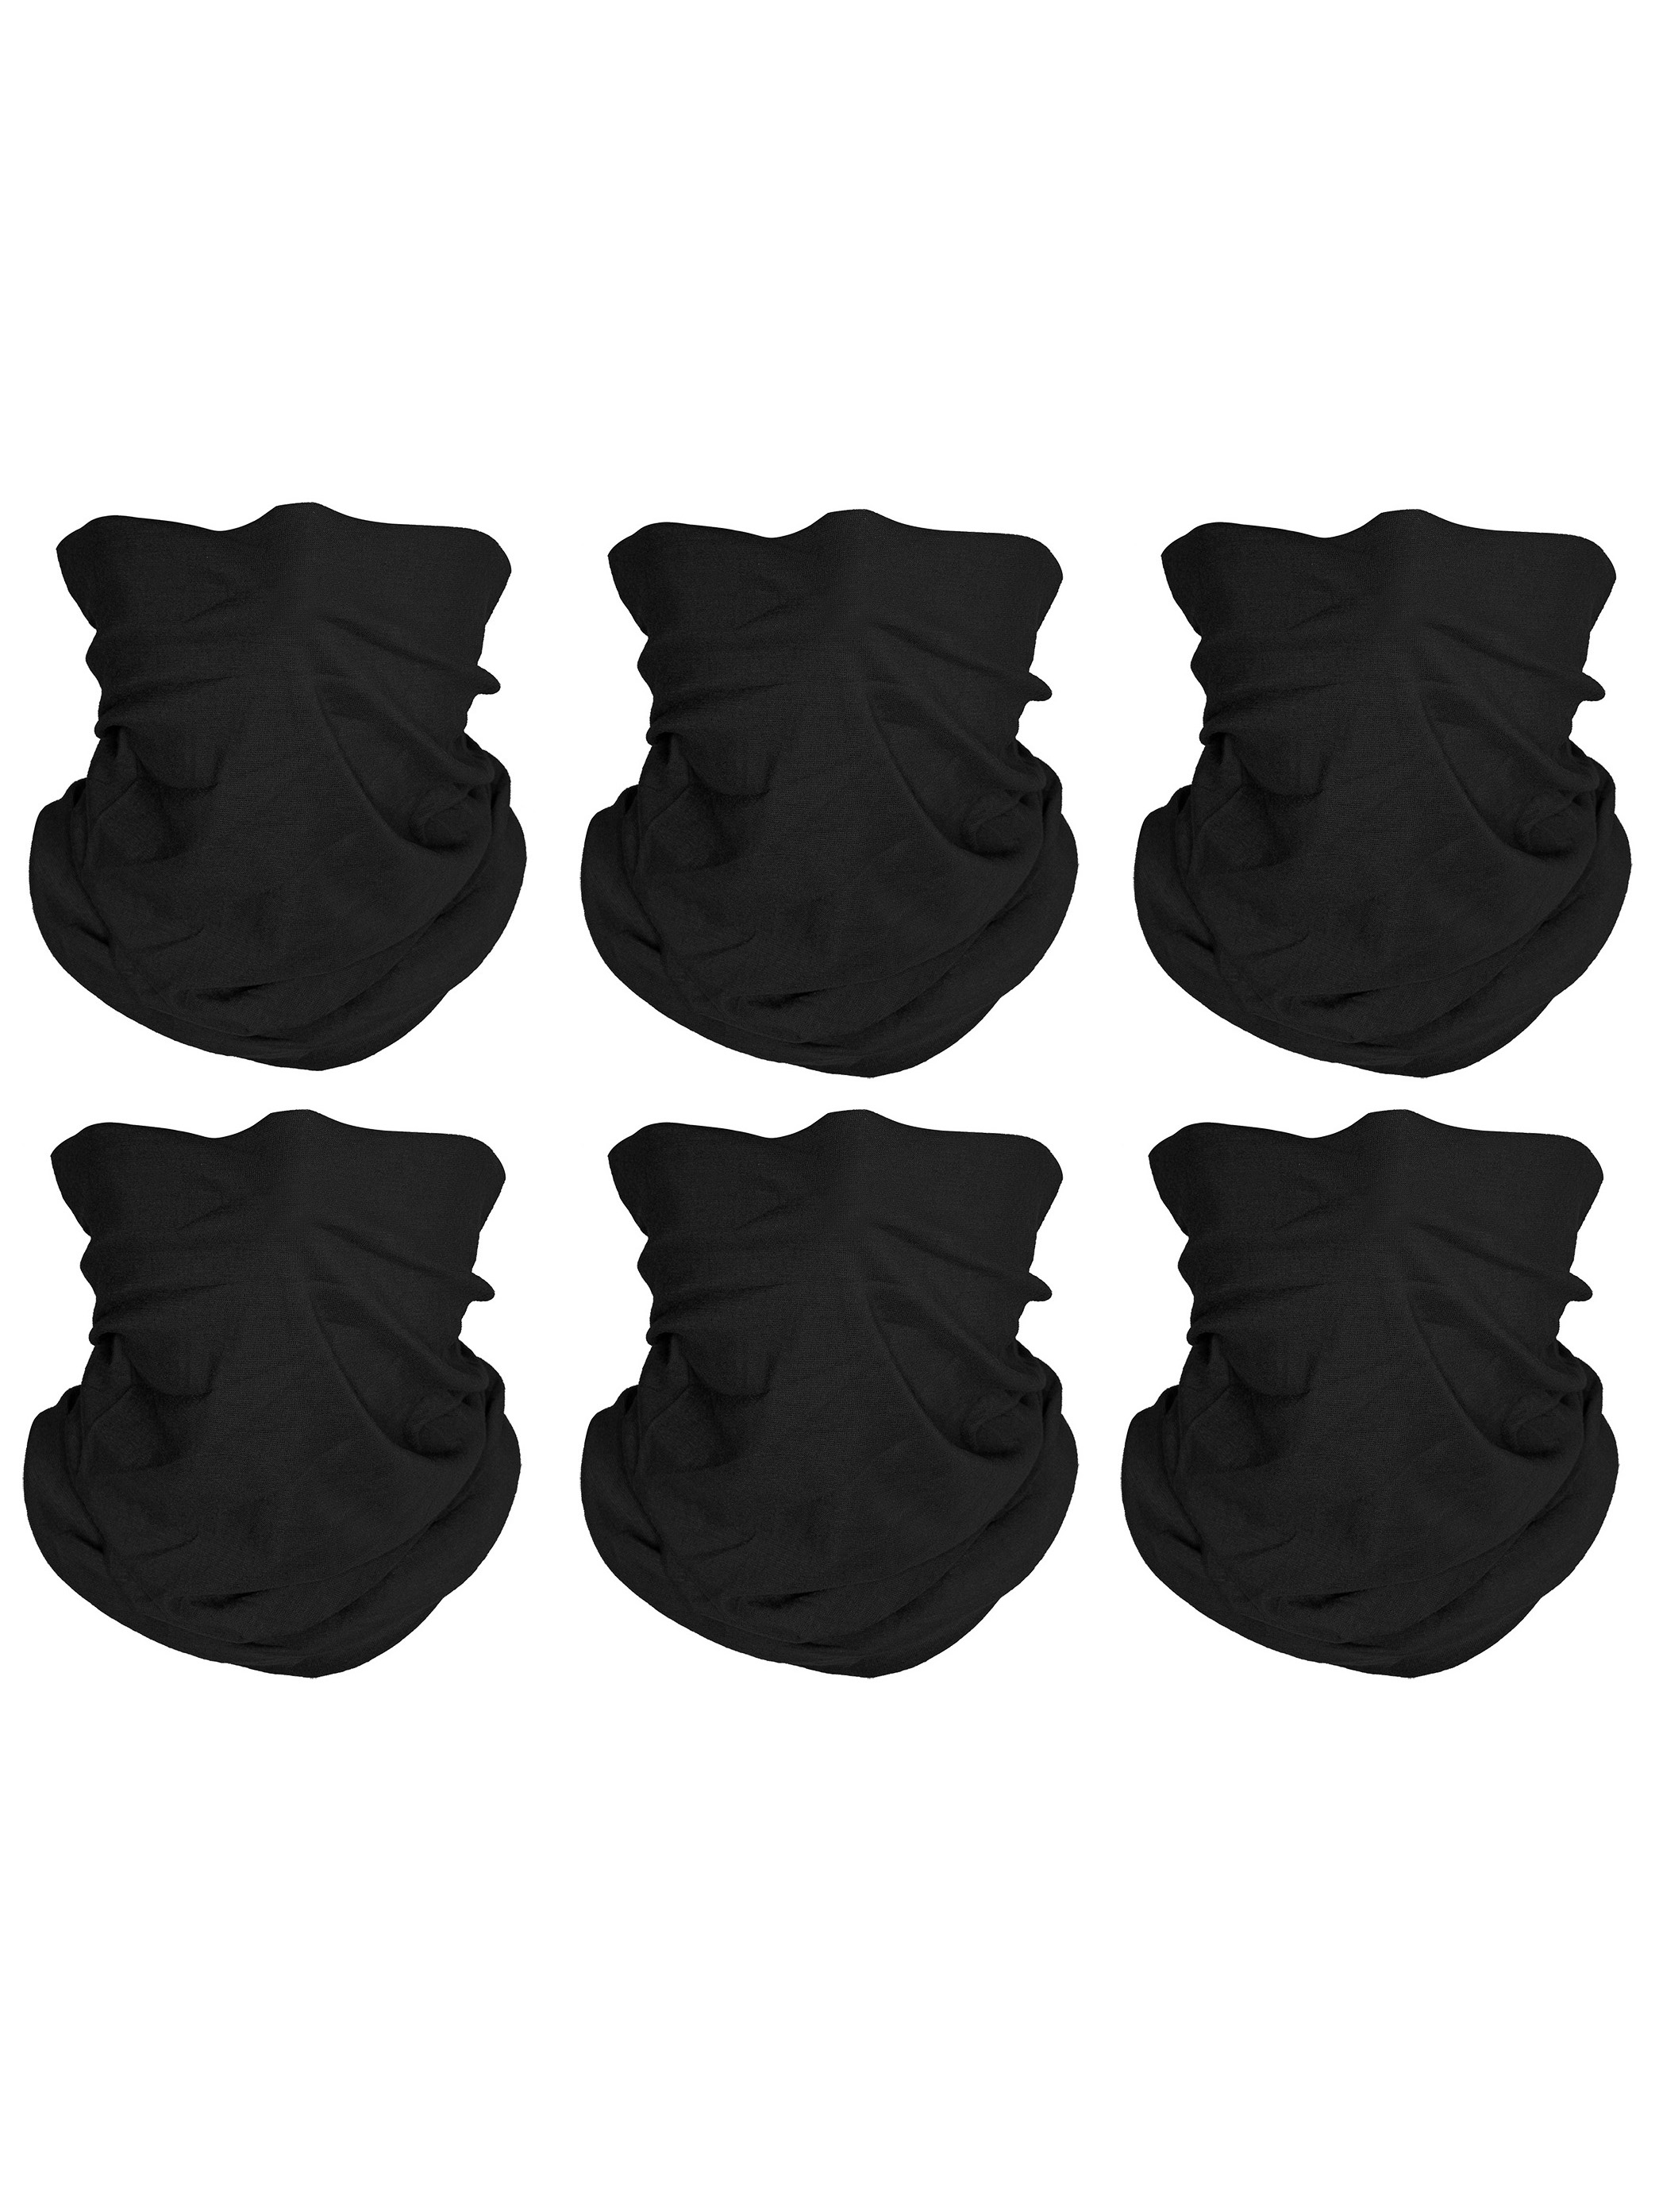 Top Headwear Face Covering Neck Gaiter - 6-Pack - Black - image 1 of 1